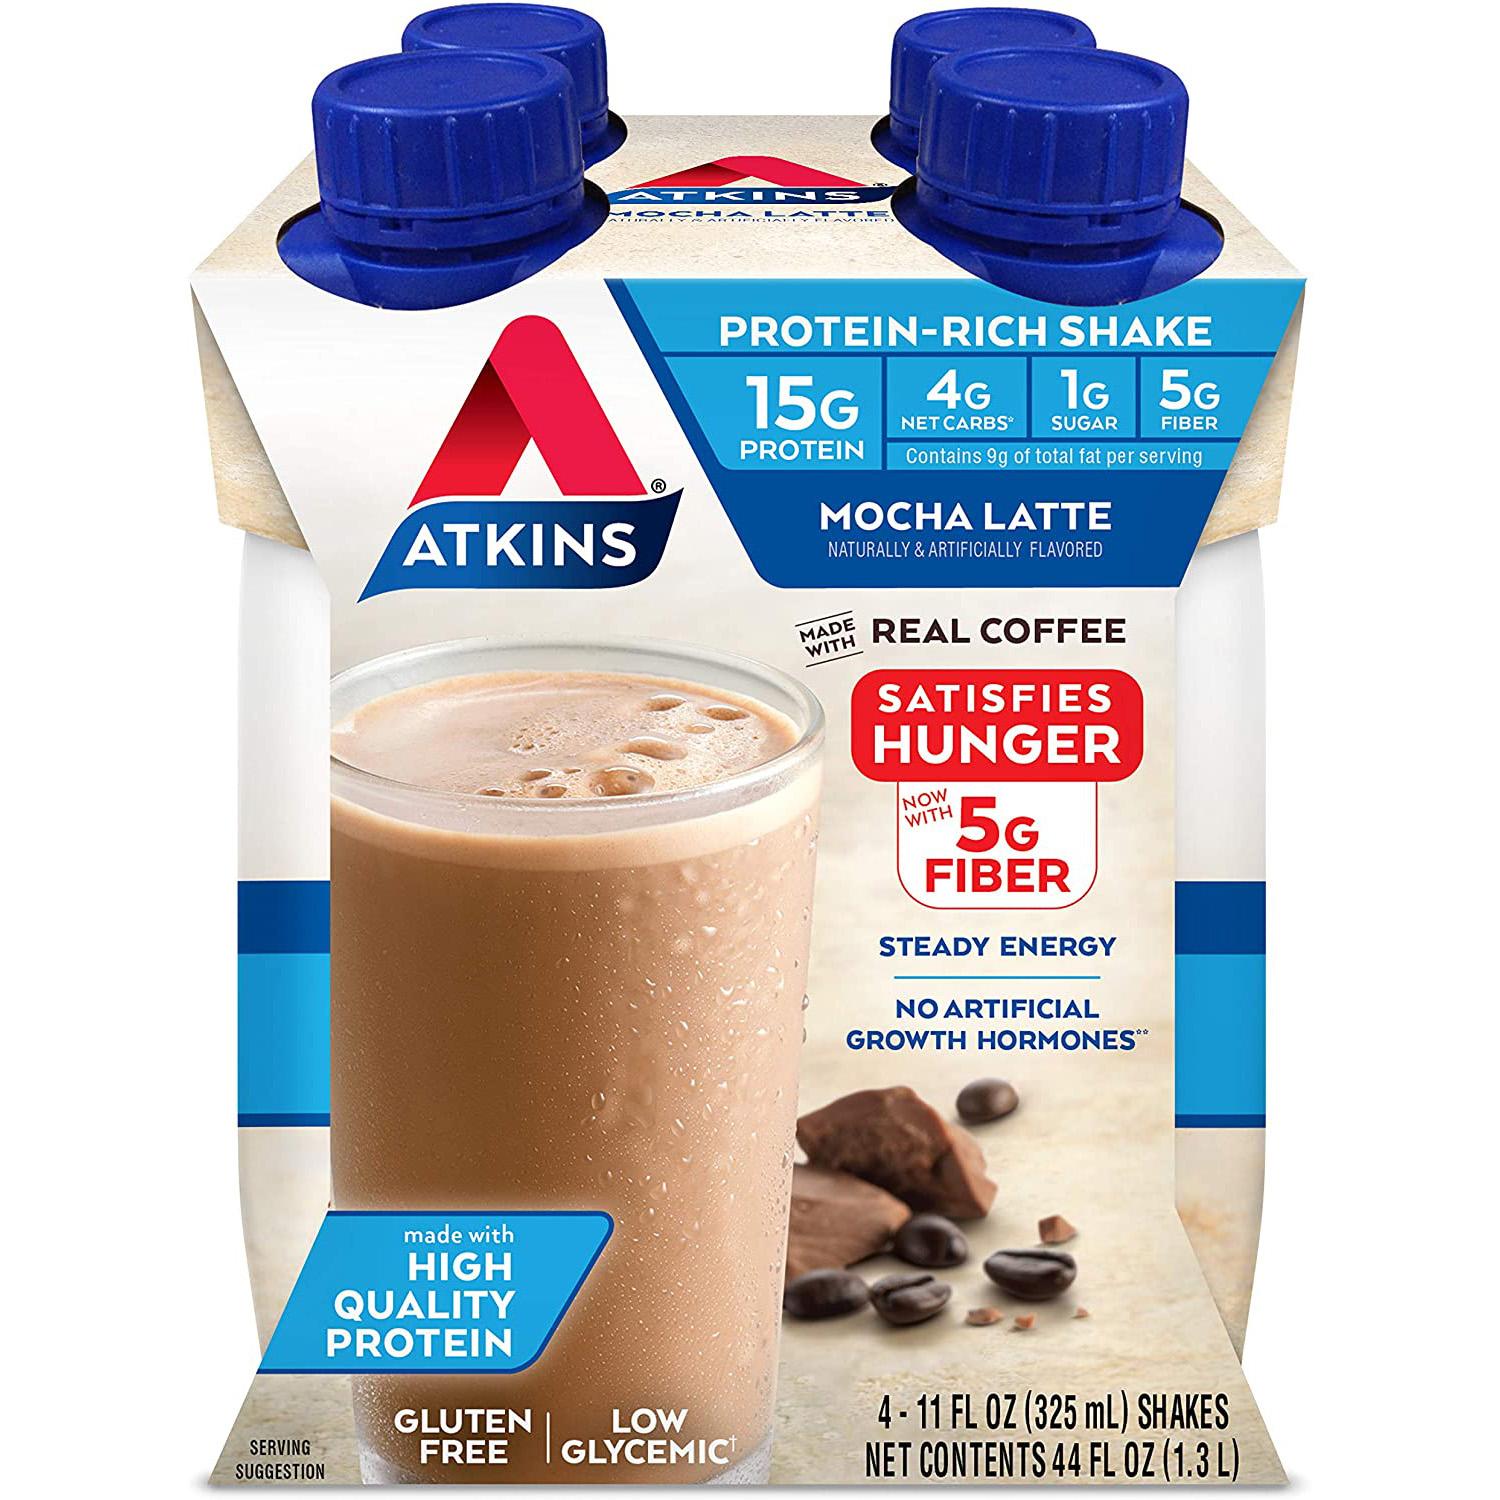 12 Atkins Mocha Latte Protein Rich Shake for $12.04 Shipped